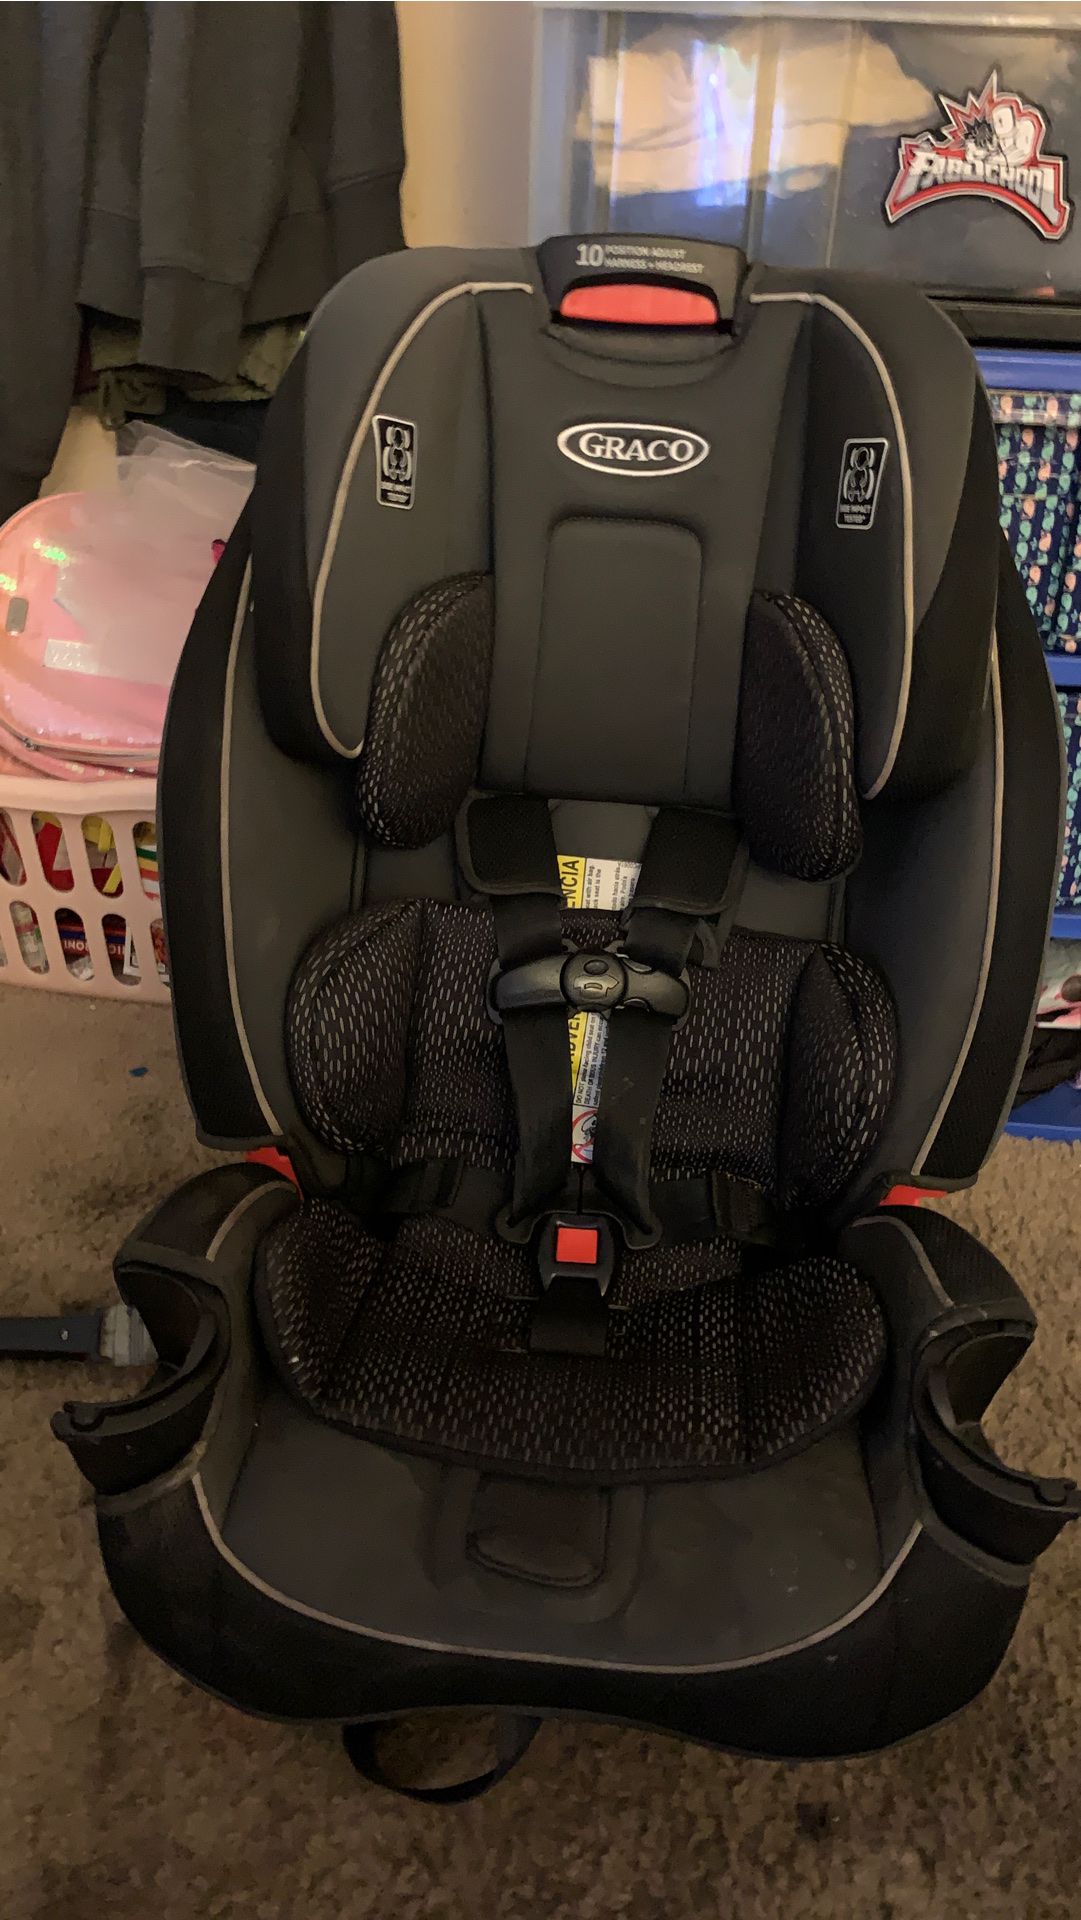 Newborn car seat all the way to toddler booster seat! 4-1 car seat holds 5-100 pounds